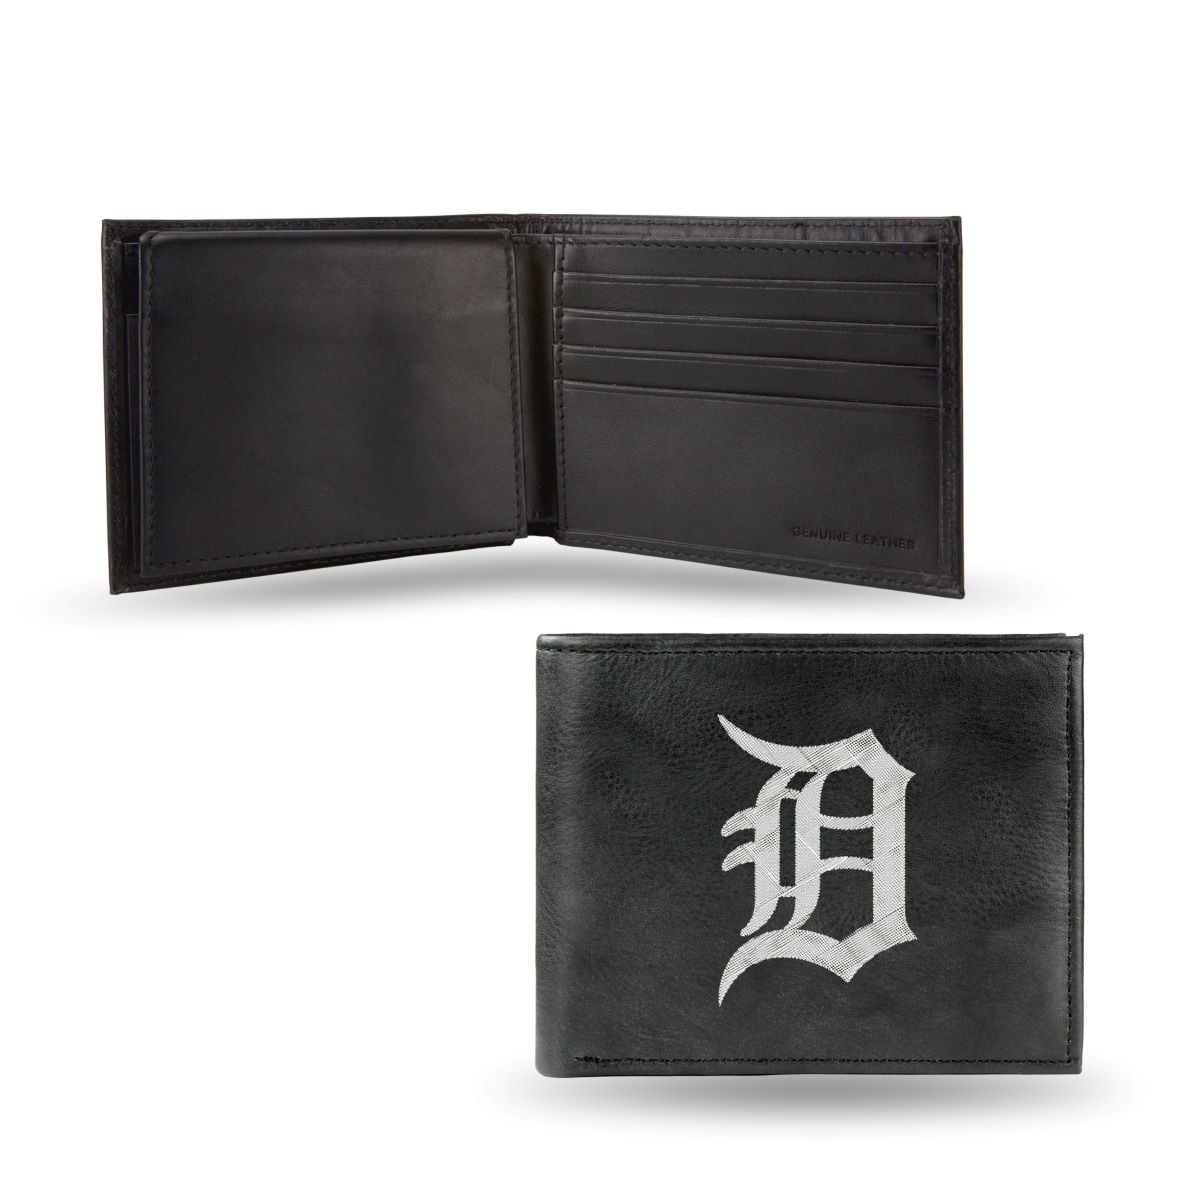 Charlotte Hornets Embroidered Black Leather Bi-fold Wallet with Old Classic Logo 